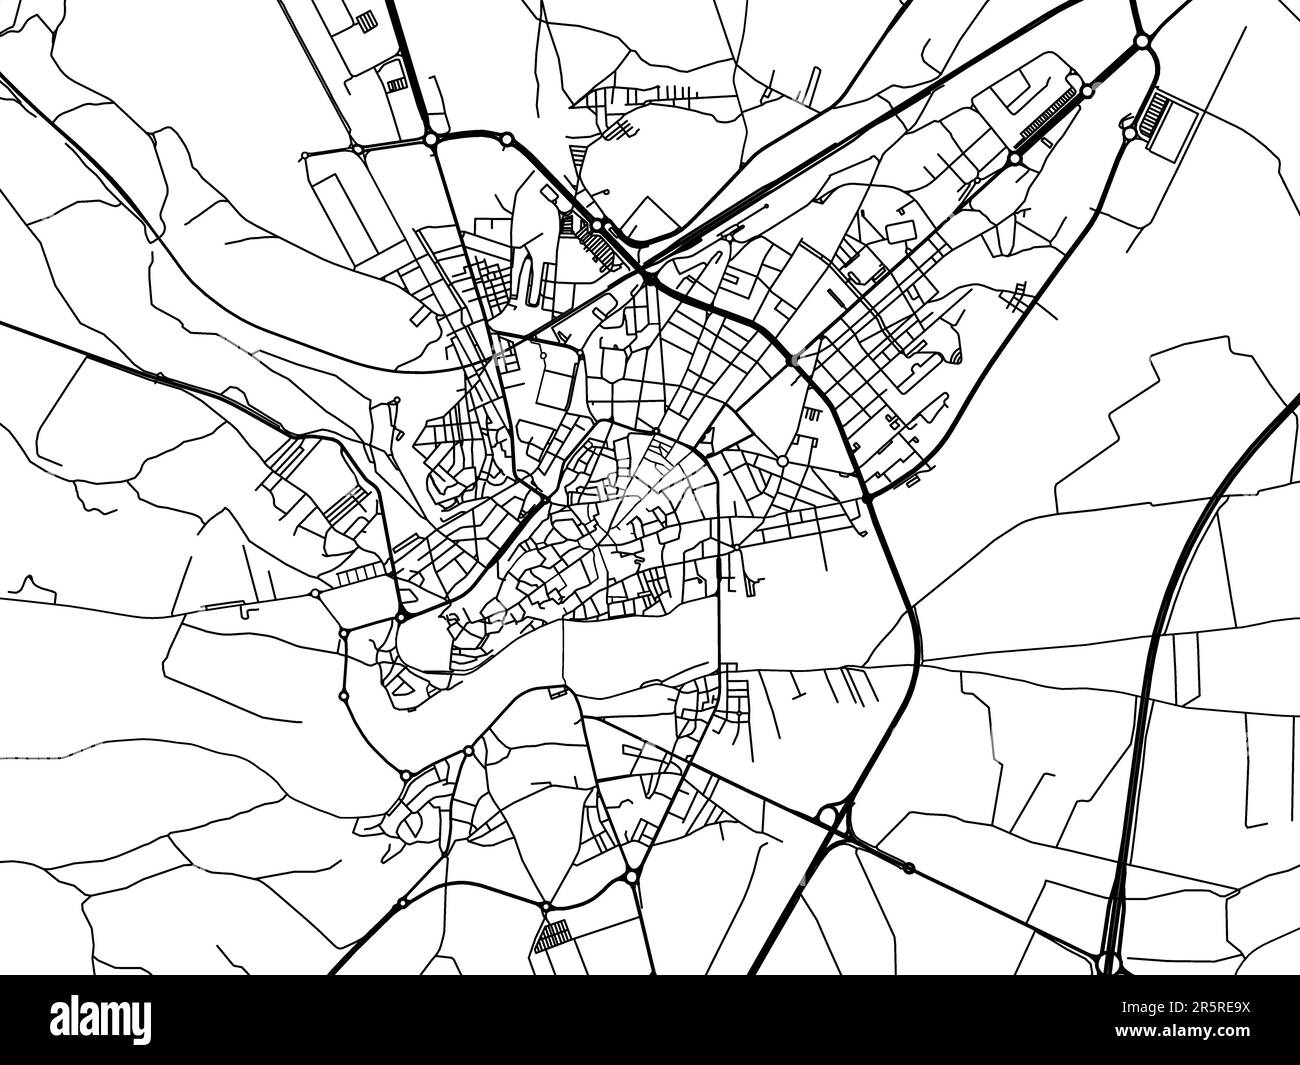 Vector road map of the city of  Zamora in Spain on a white background. Stock Photo